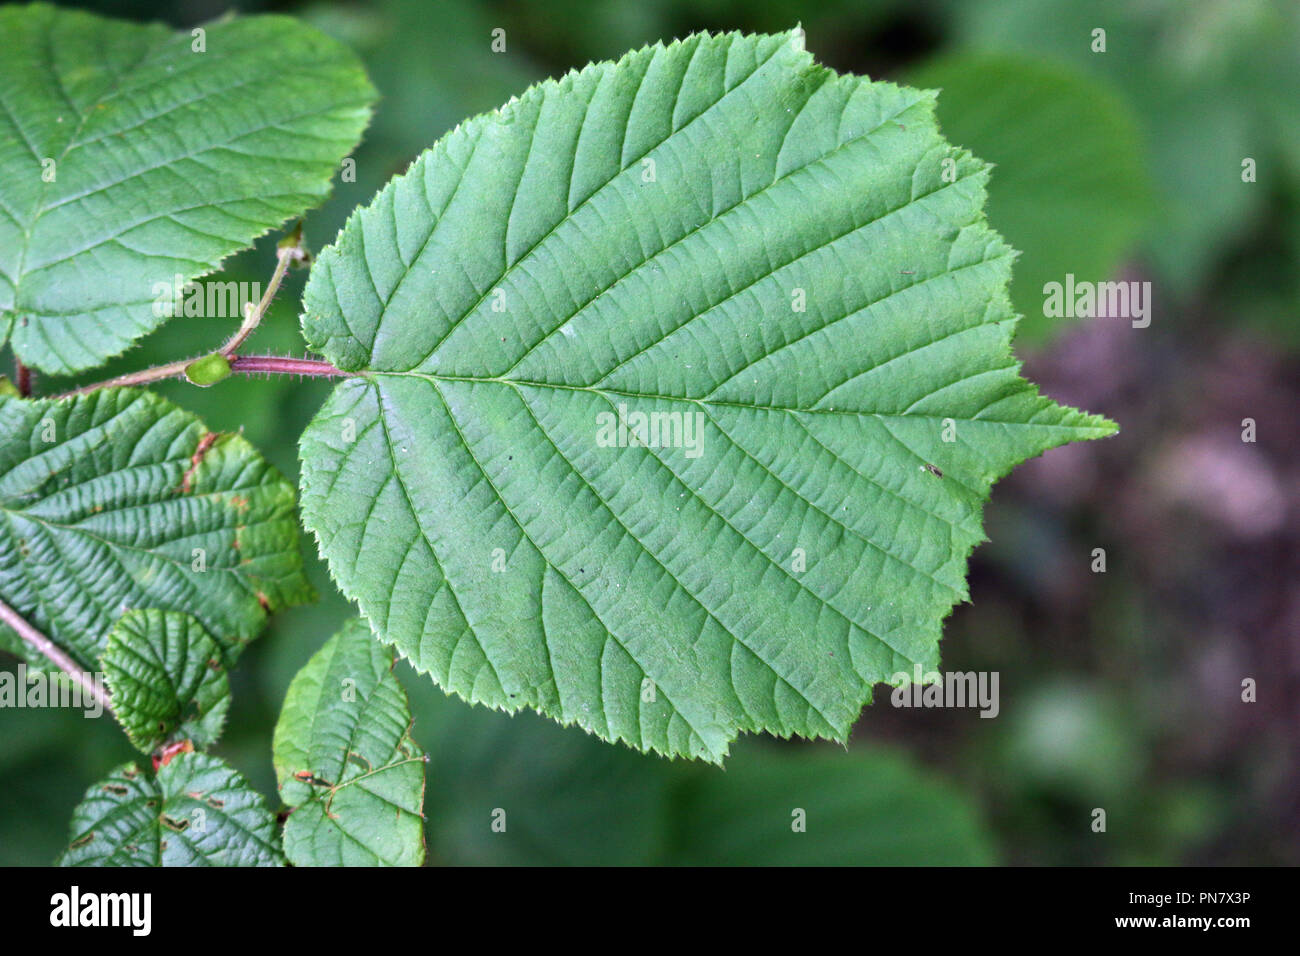 Hazel (Corylus avellana) tree leaves with one prominent in the centre with a blurred background of leaves and soil. Stock Photo